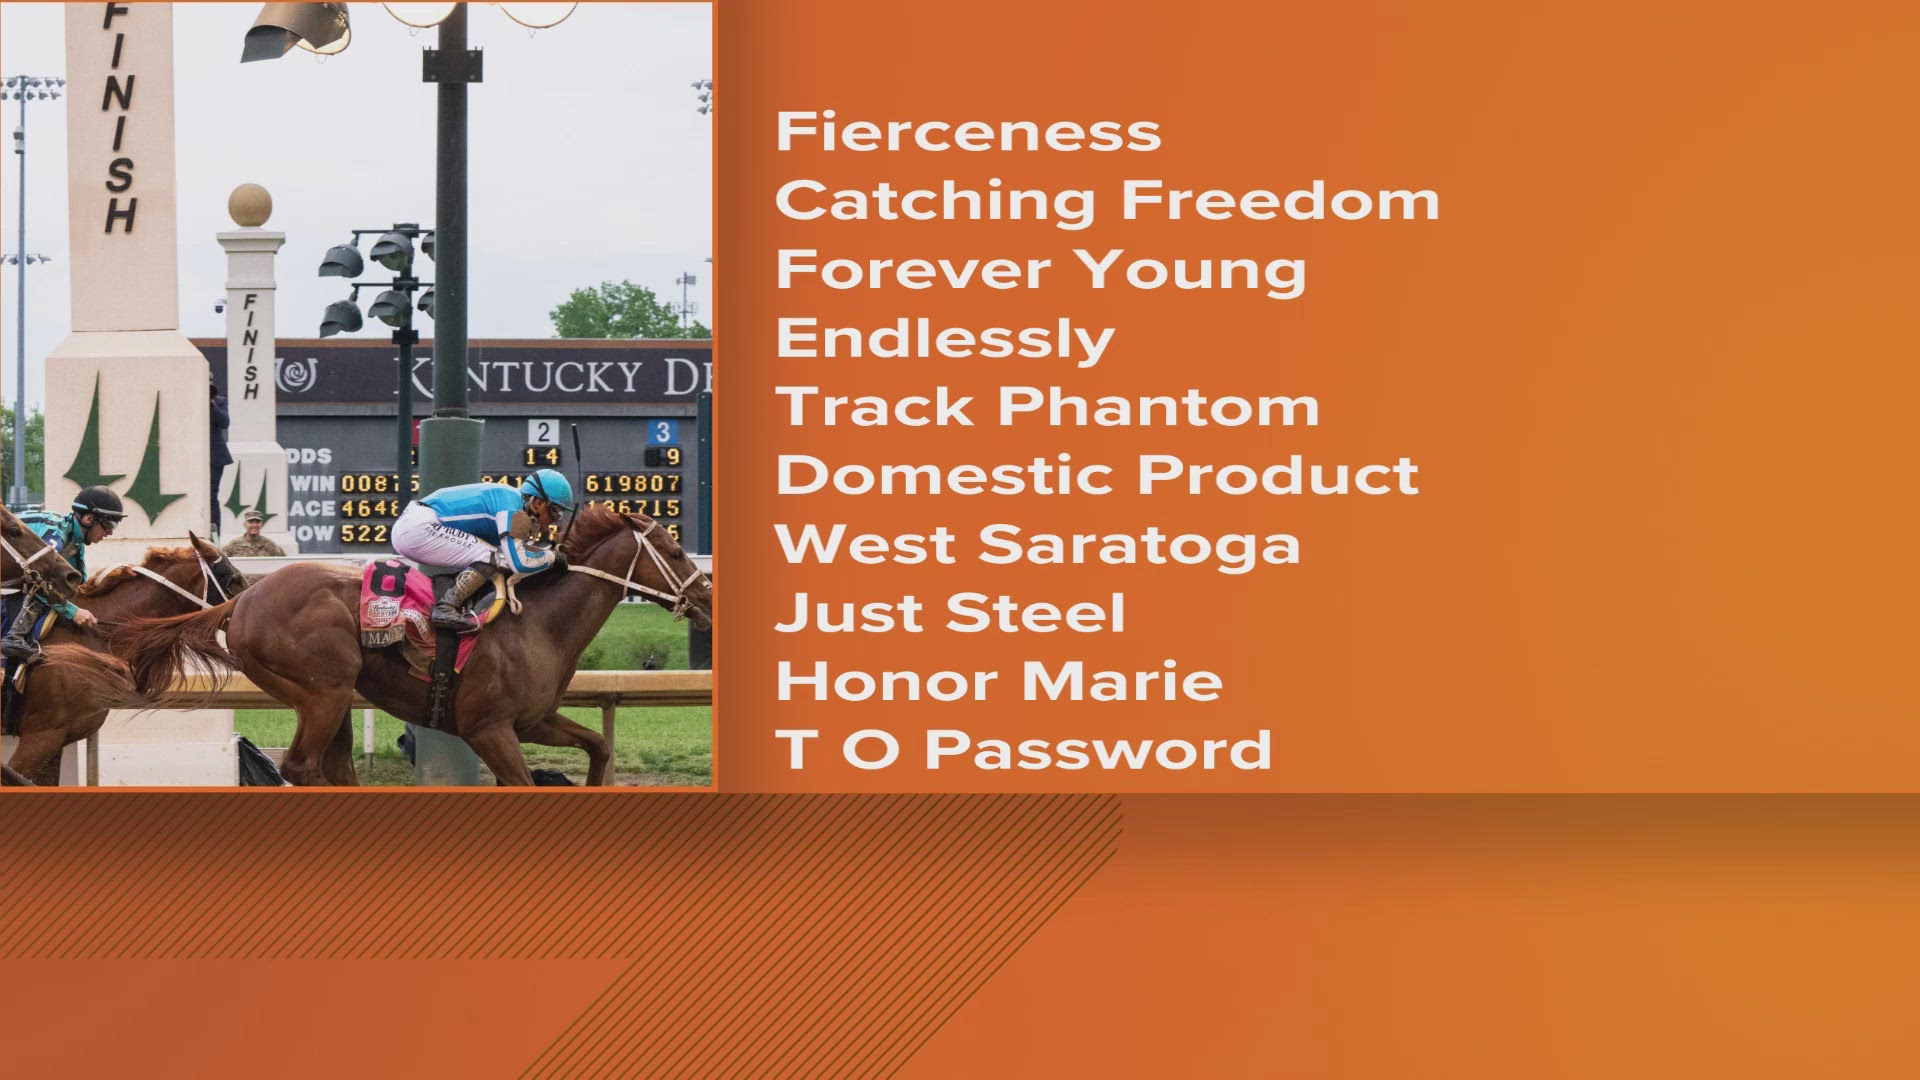 WWL Louisiana Morning Show goes over some of the interesting horse names ahead of the Kentucky Derby.